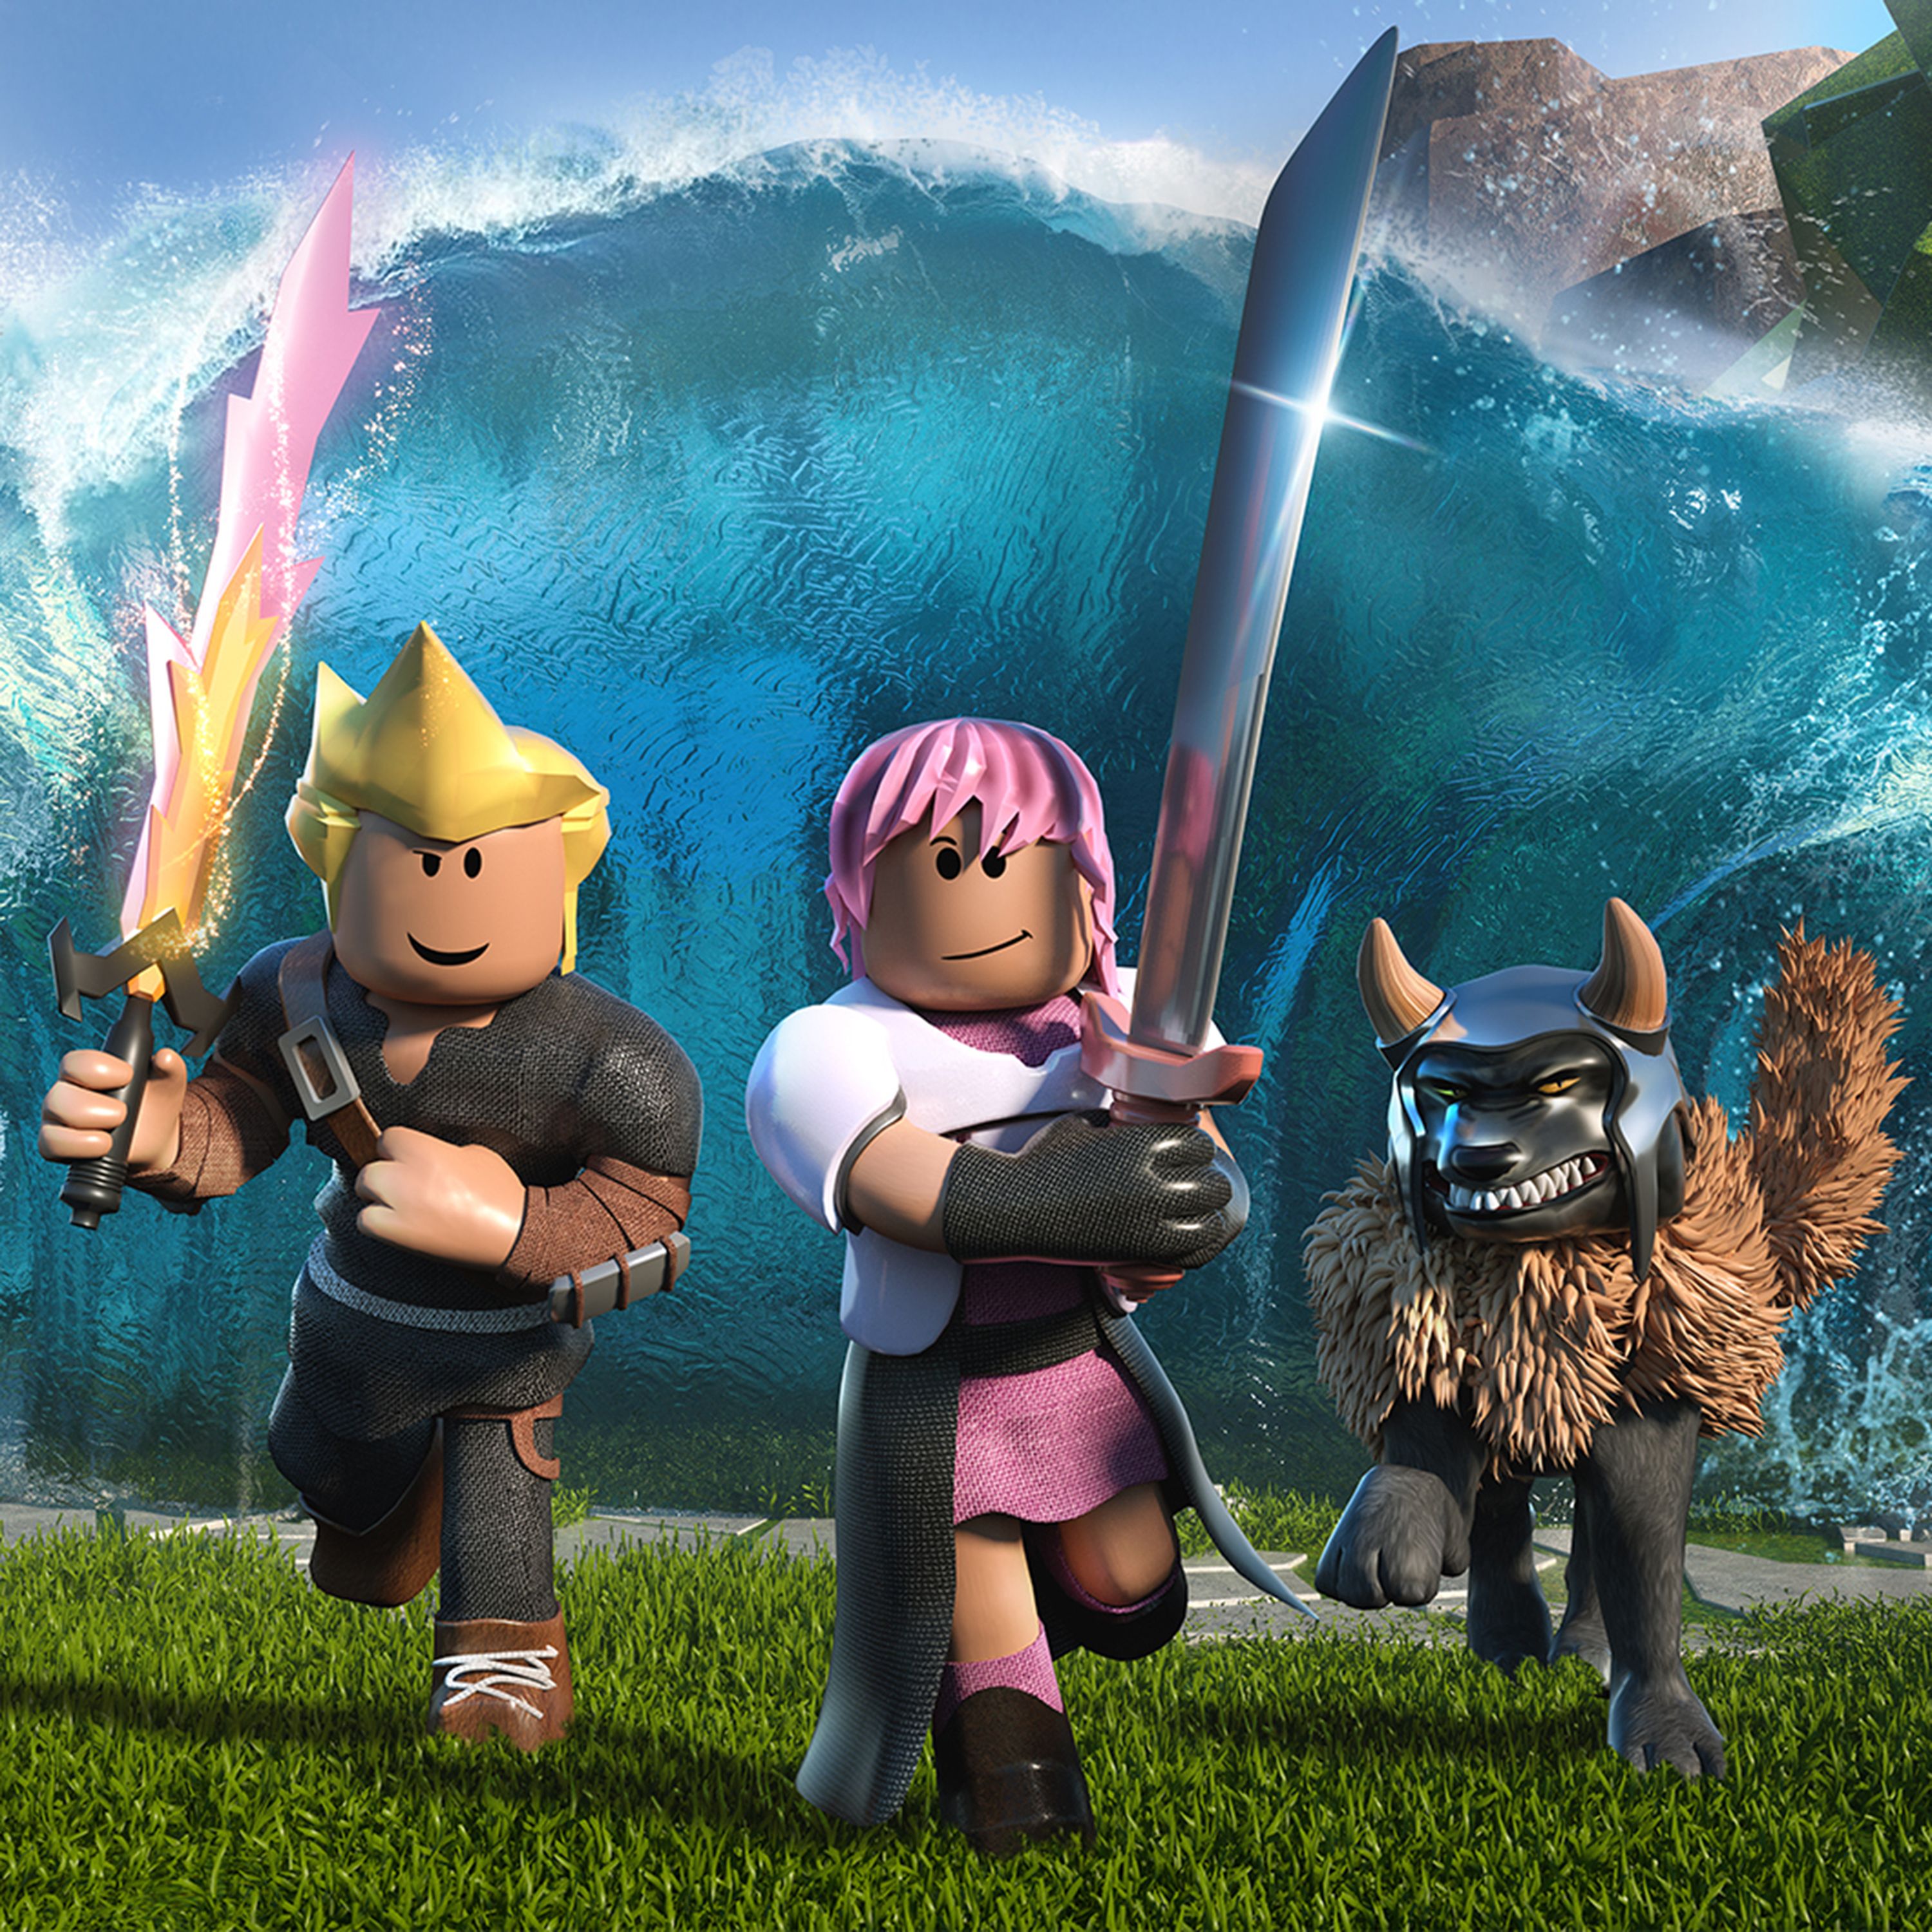 Roblox Leads Cloud Gaming Revolution Ft News In Focus On Acast - roblox global news